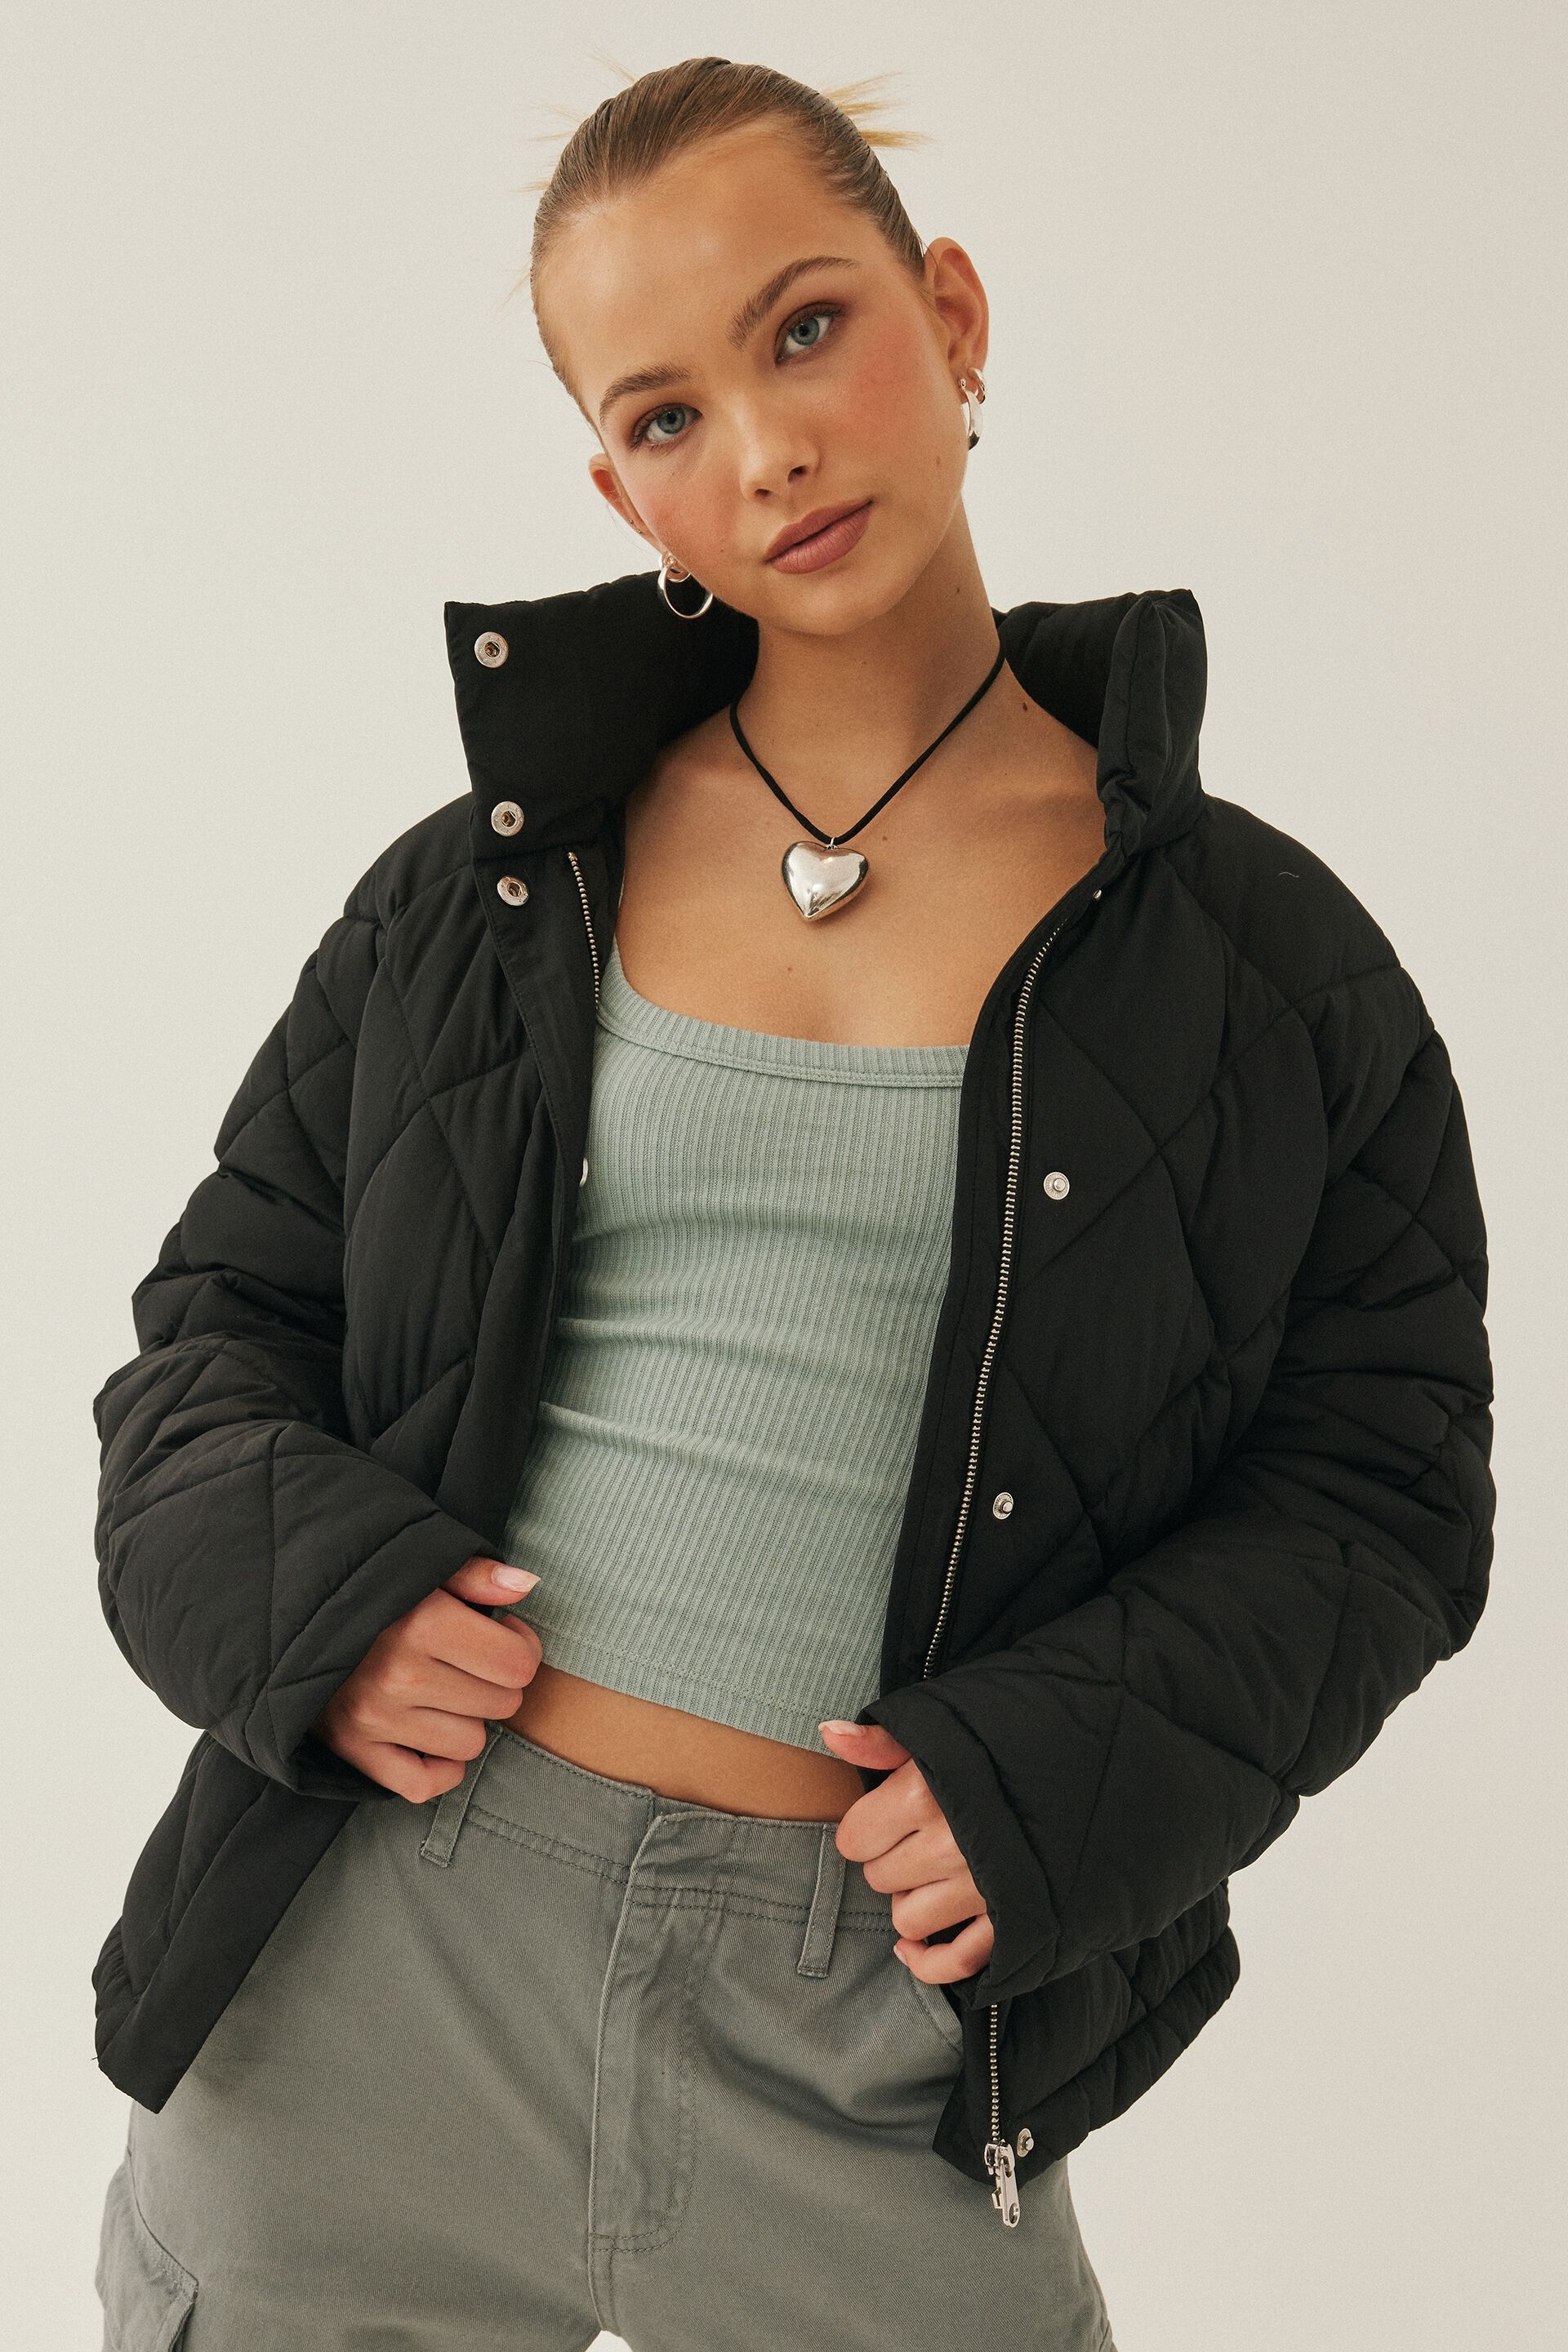 Buy Women's Black Relaxed Fit Puffer Jacket Online at Bewakoof